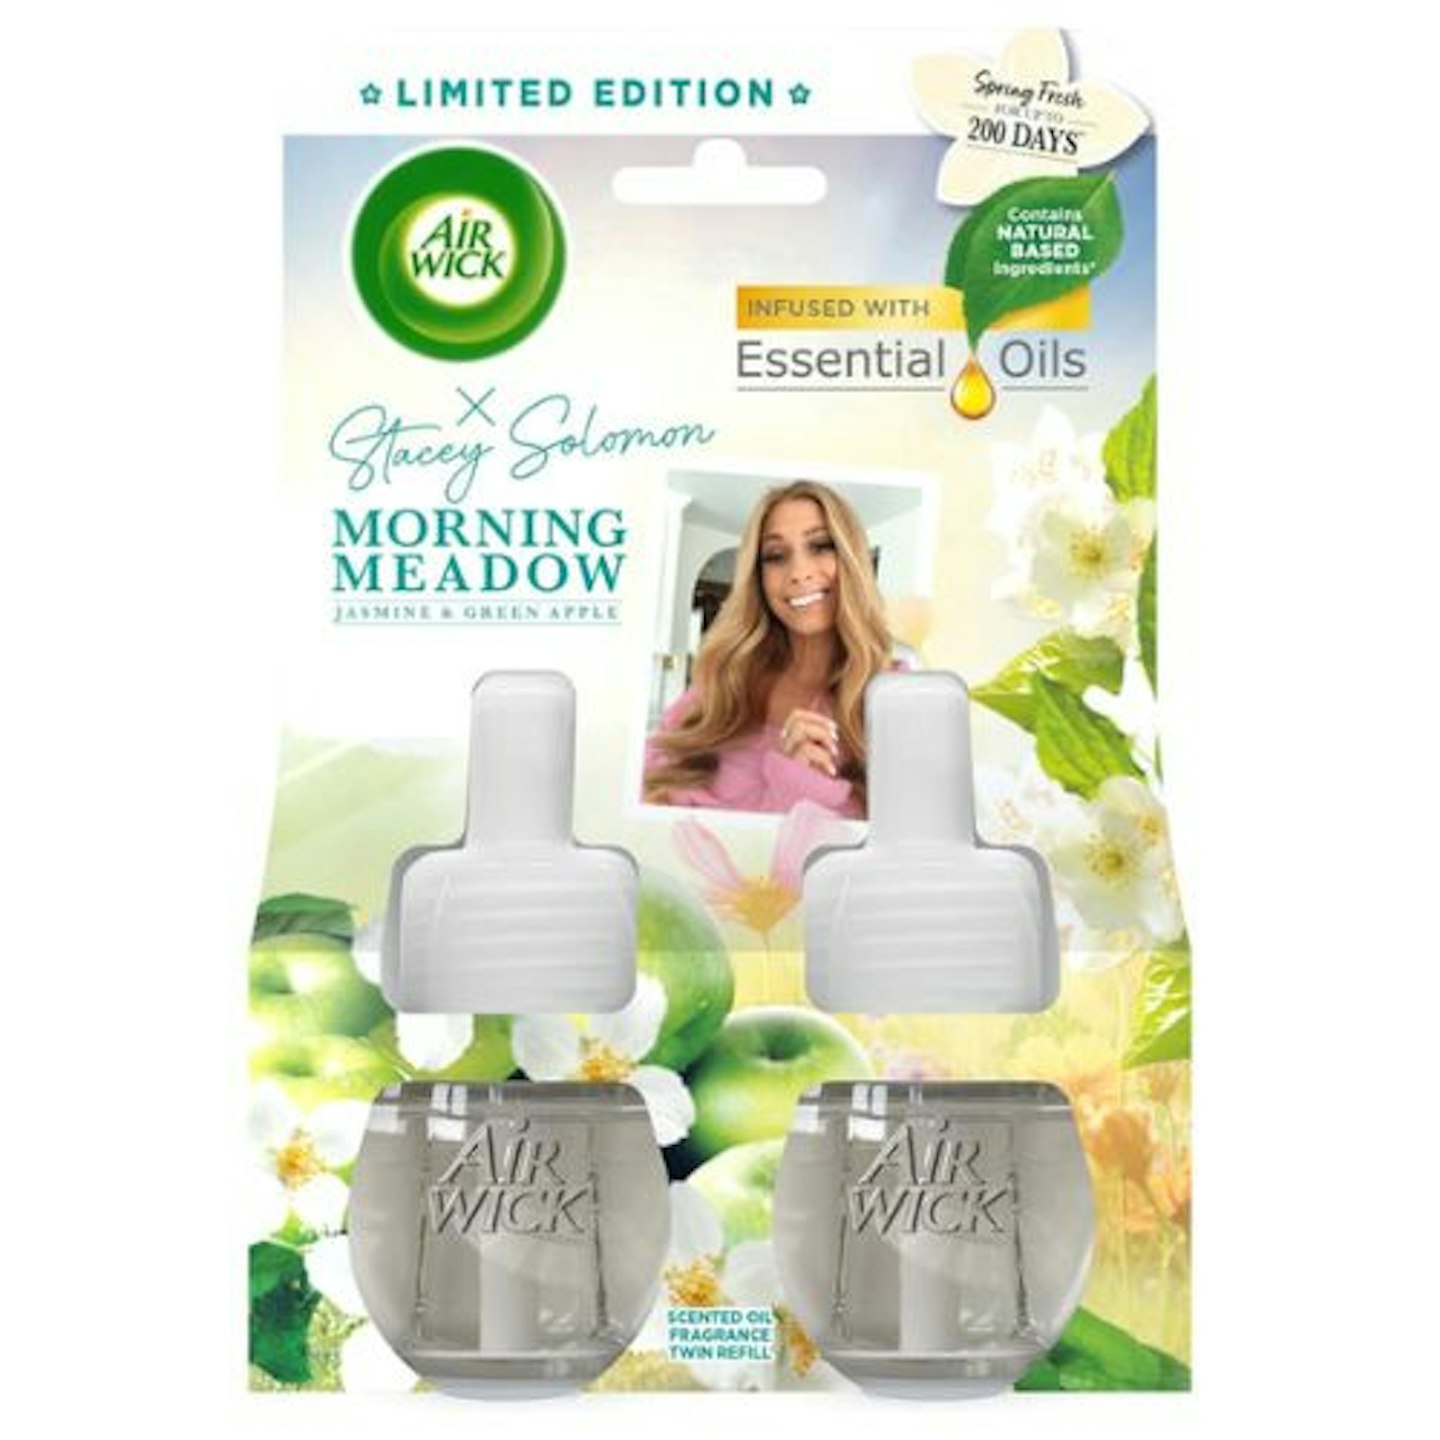 Air Wick Morning Meadow Scented Oil Electrical Plug-In Diffuser Twin Refill 19ml